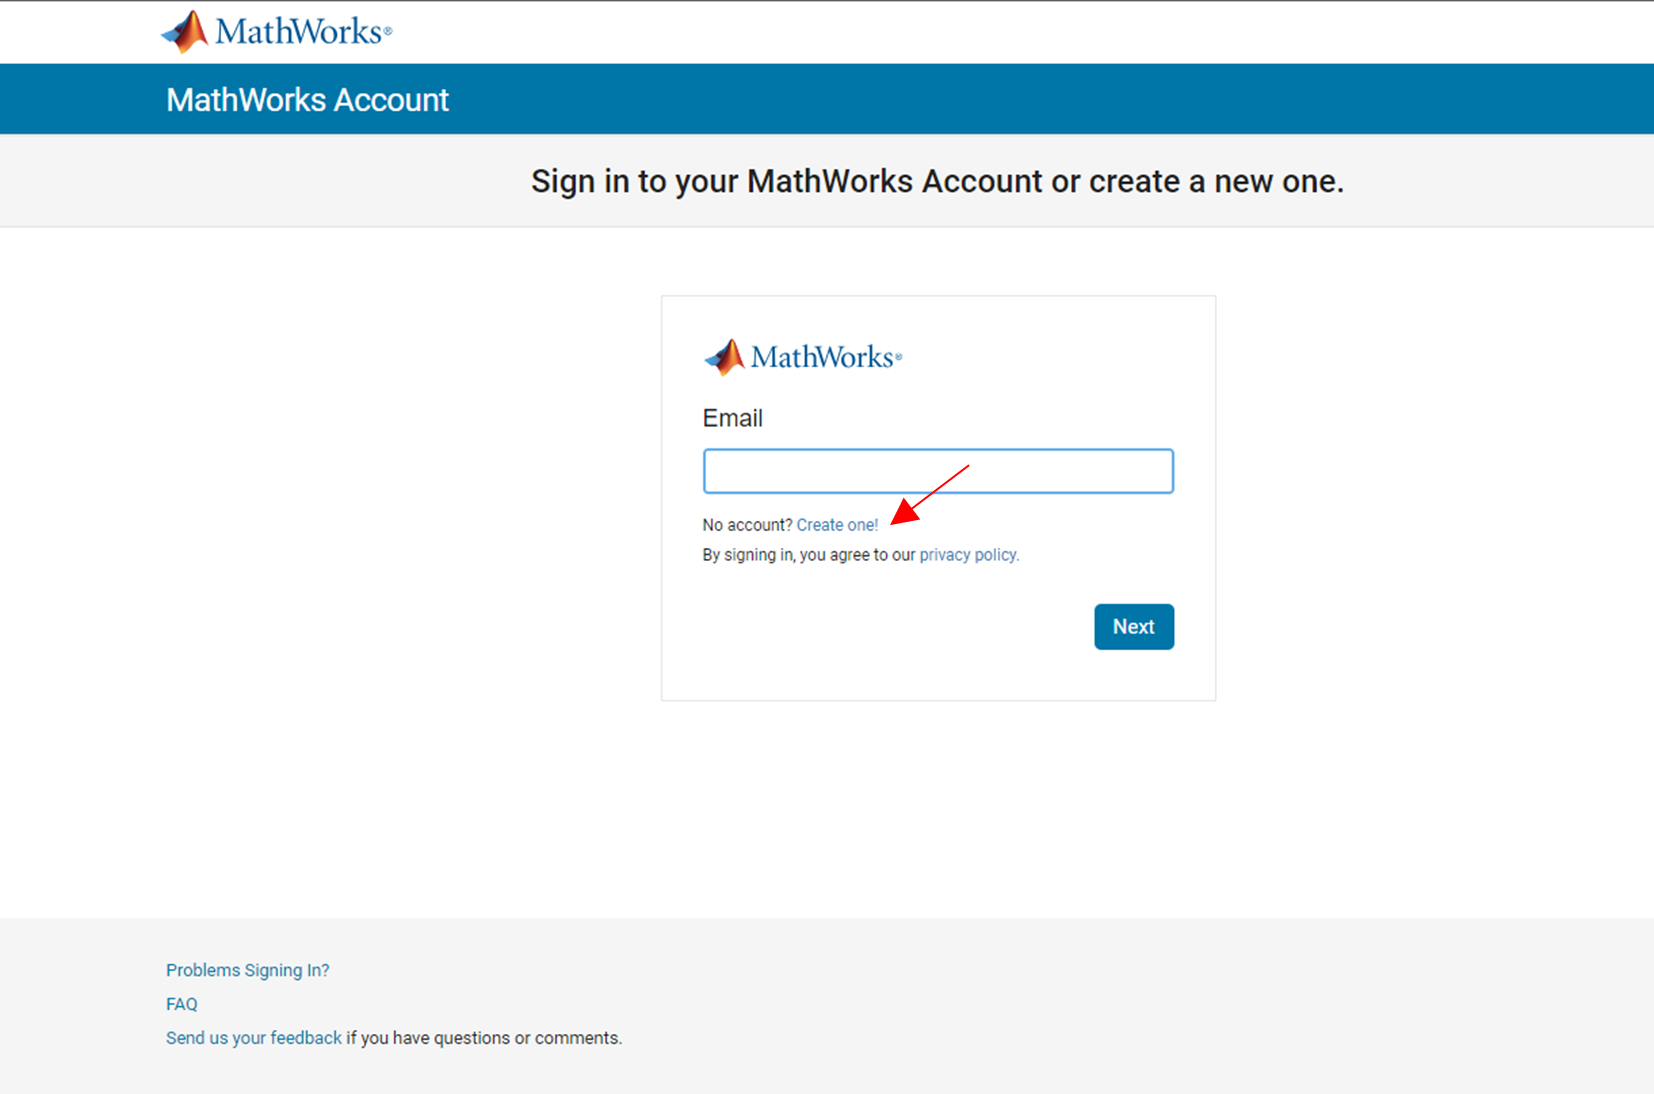 Creating a new MathWorks account